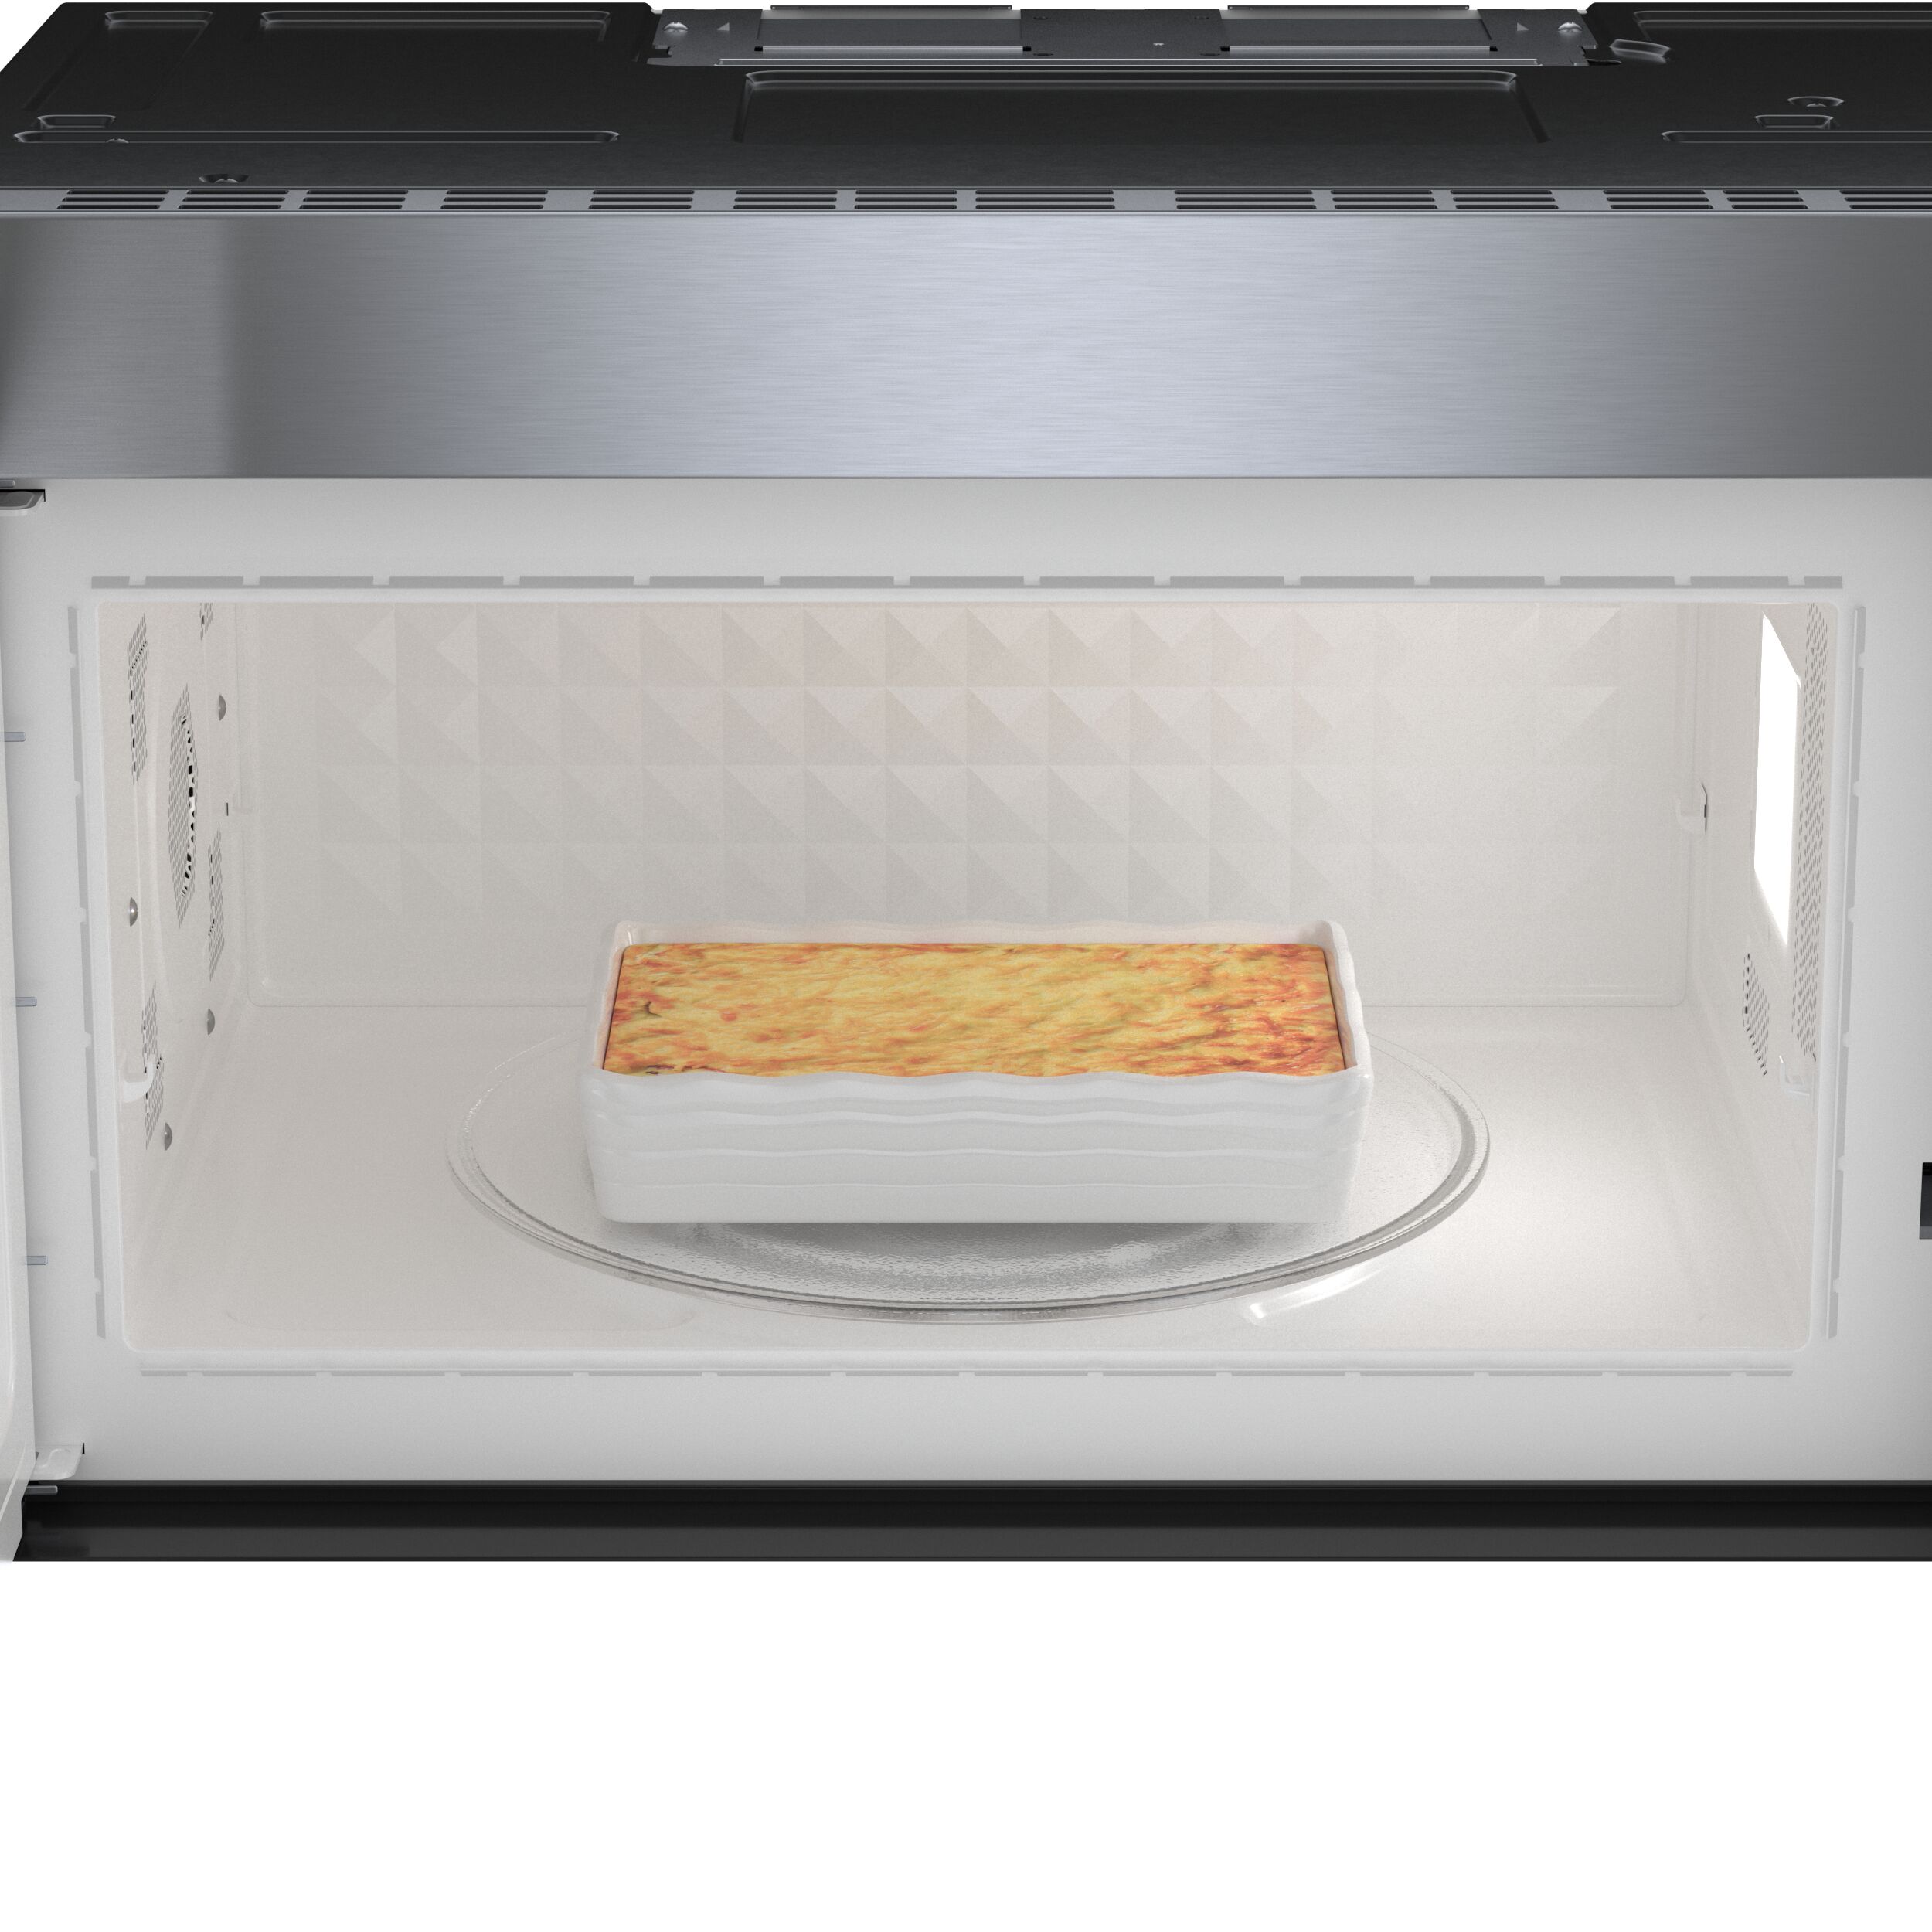 Bosch HMB5051 24 Inch Built-In Microwave Oven with Automatic Sensor, Keep  Warm, ClearTouch®, Recessed Glass Turntable, Popcorn Program, 2.1 cu. ft.  Capacity, 1200 Cooking Watts, 10 Power Levels and Timer: Stainless Steel